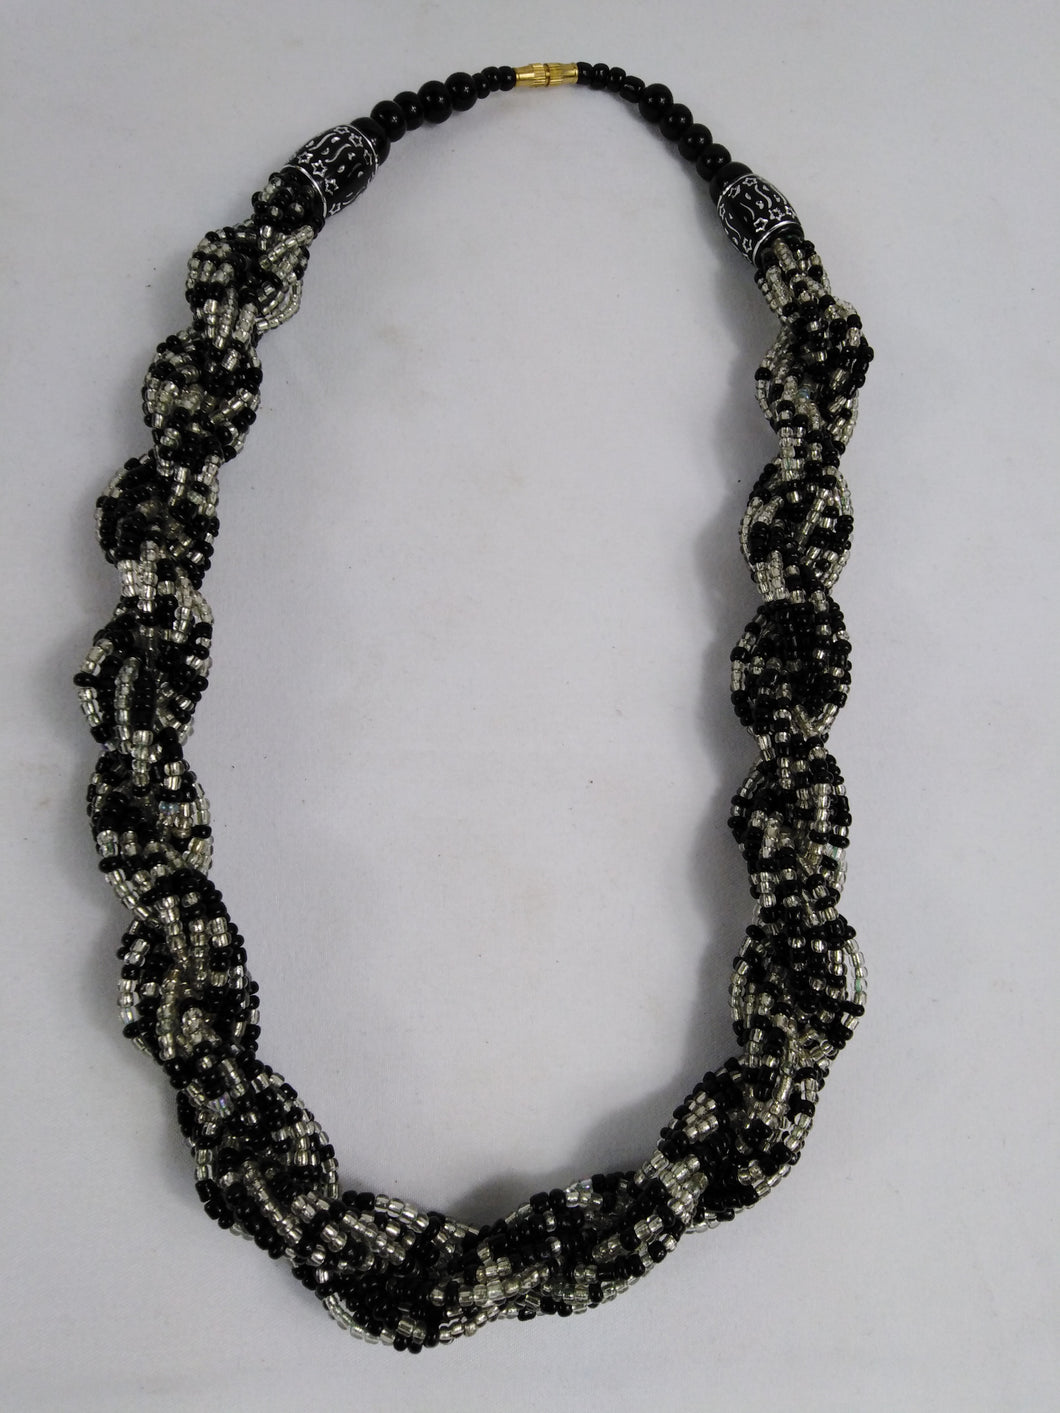 Elegant Black & White Knotted Beads Necklace